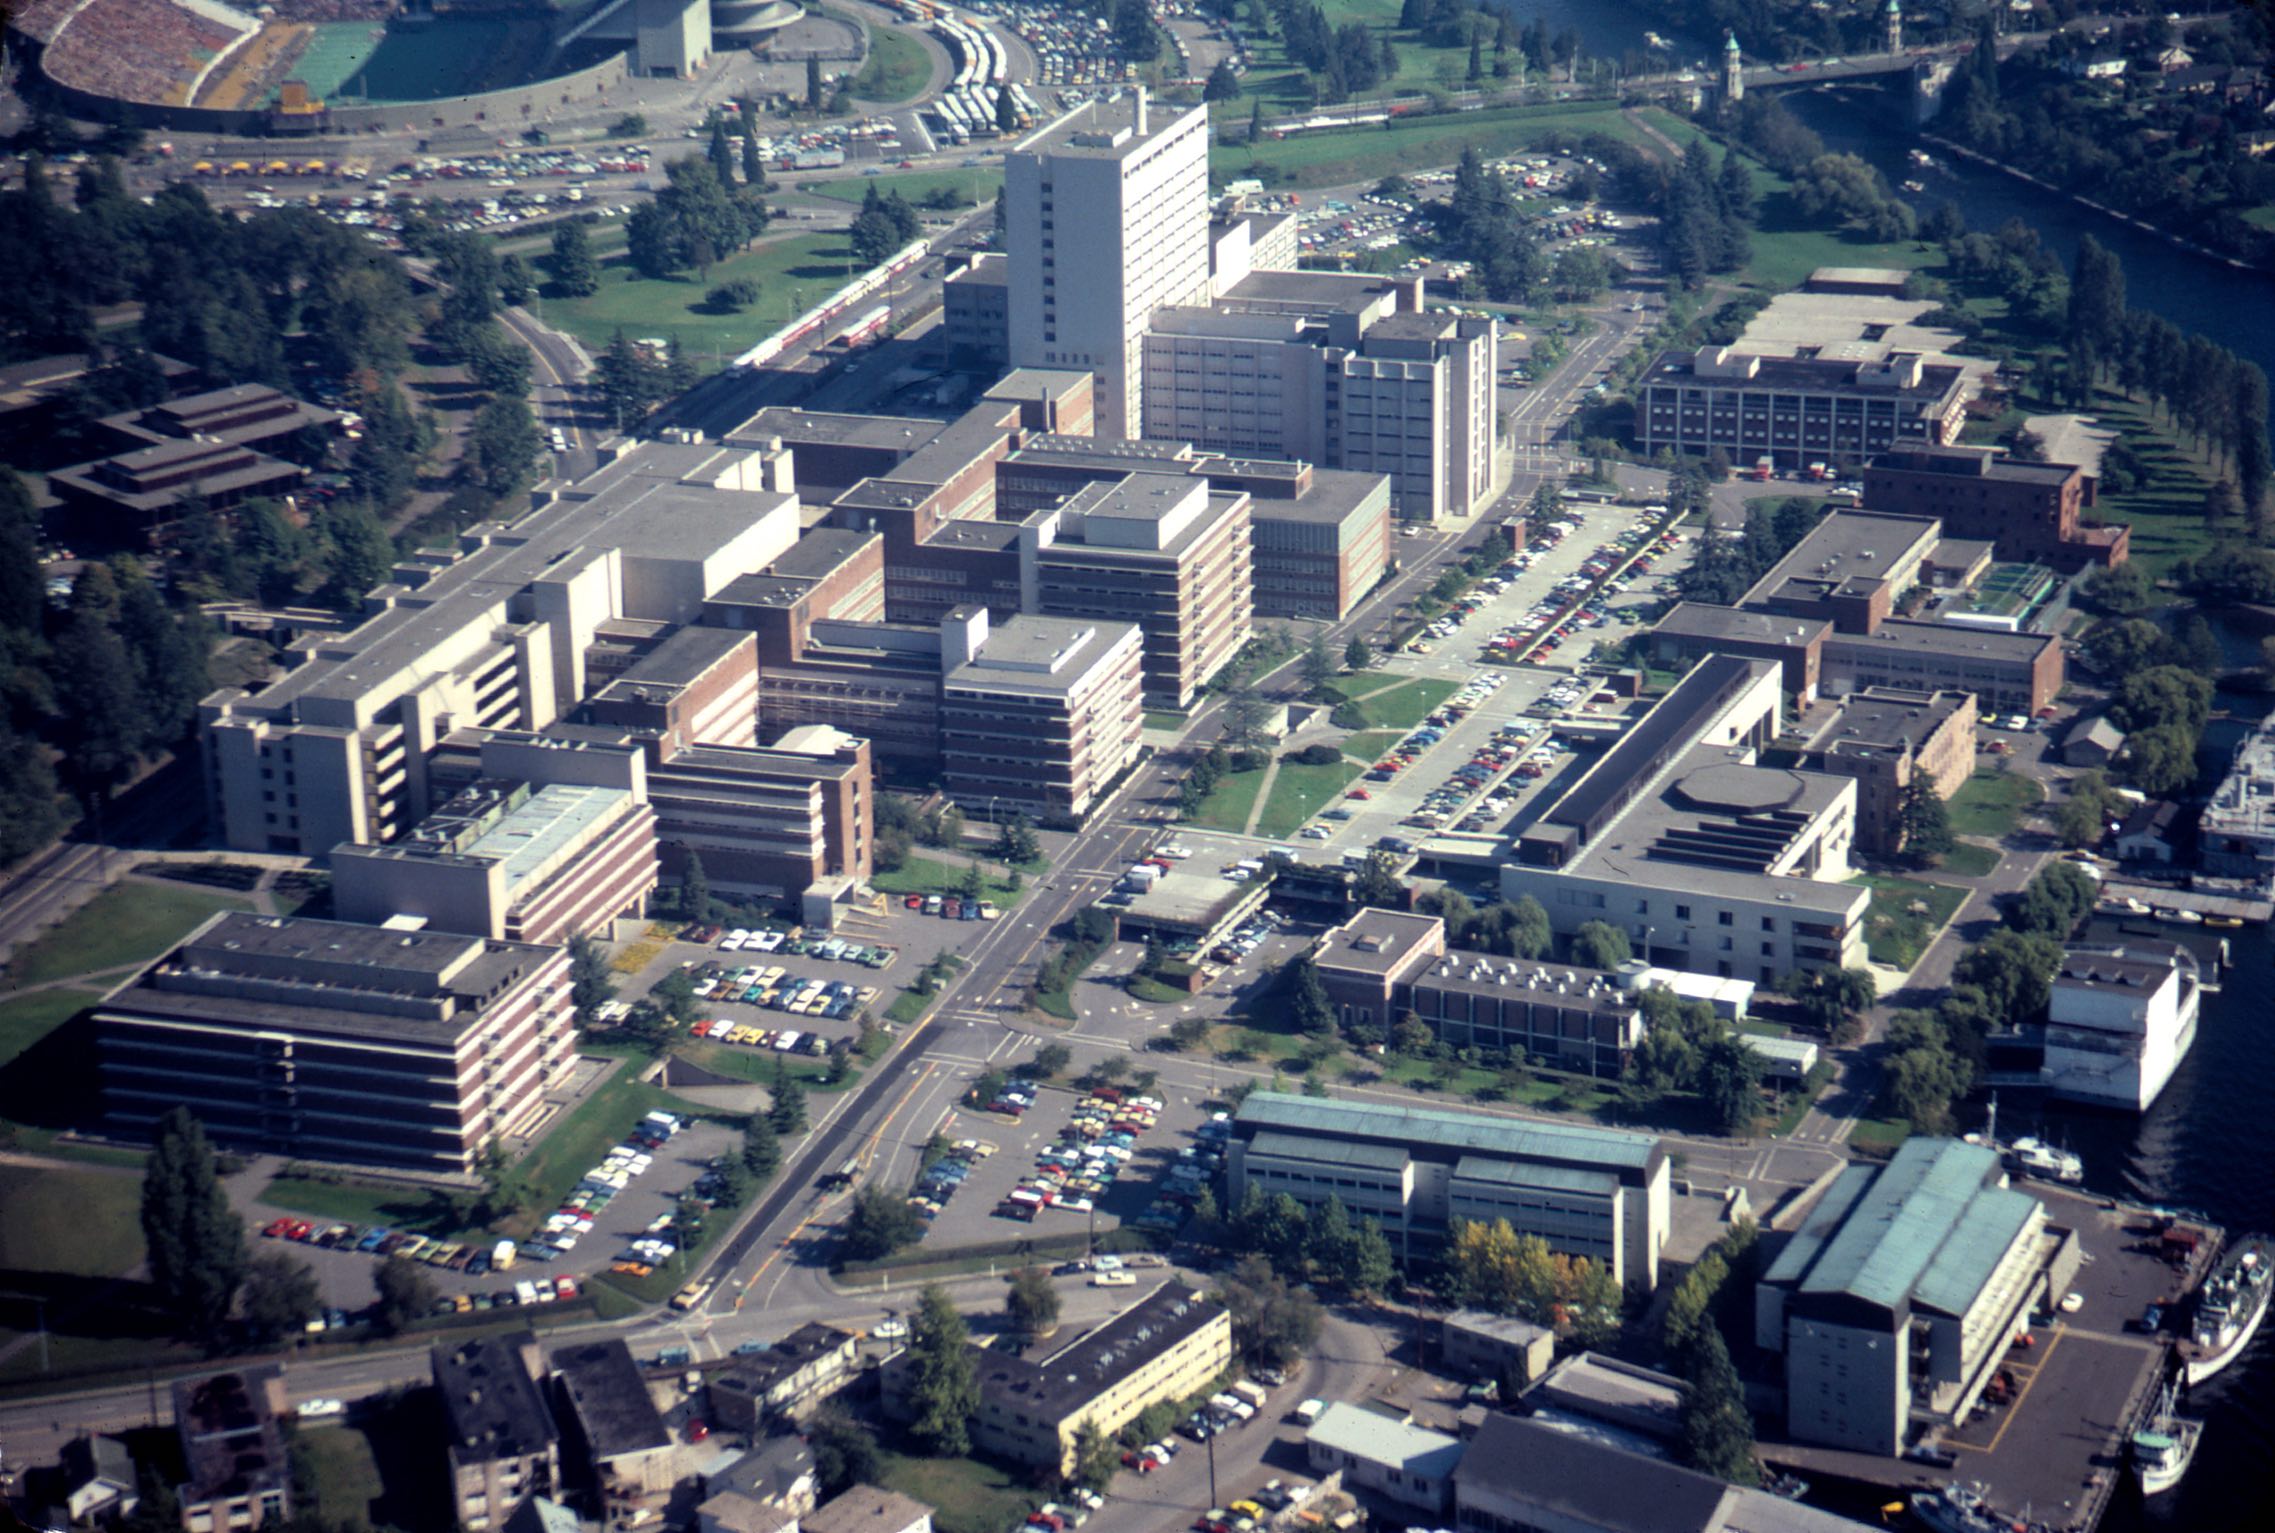 An arial view of the University of Washington Medical Center